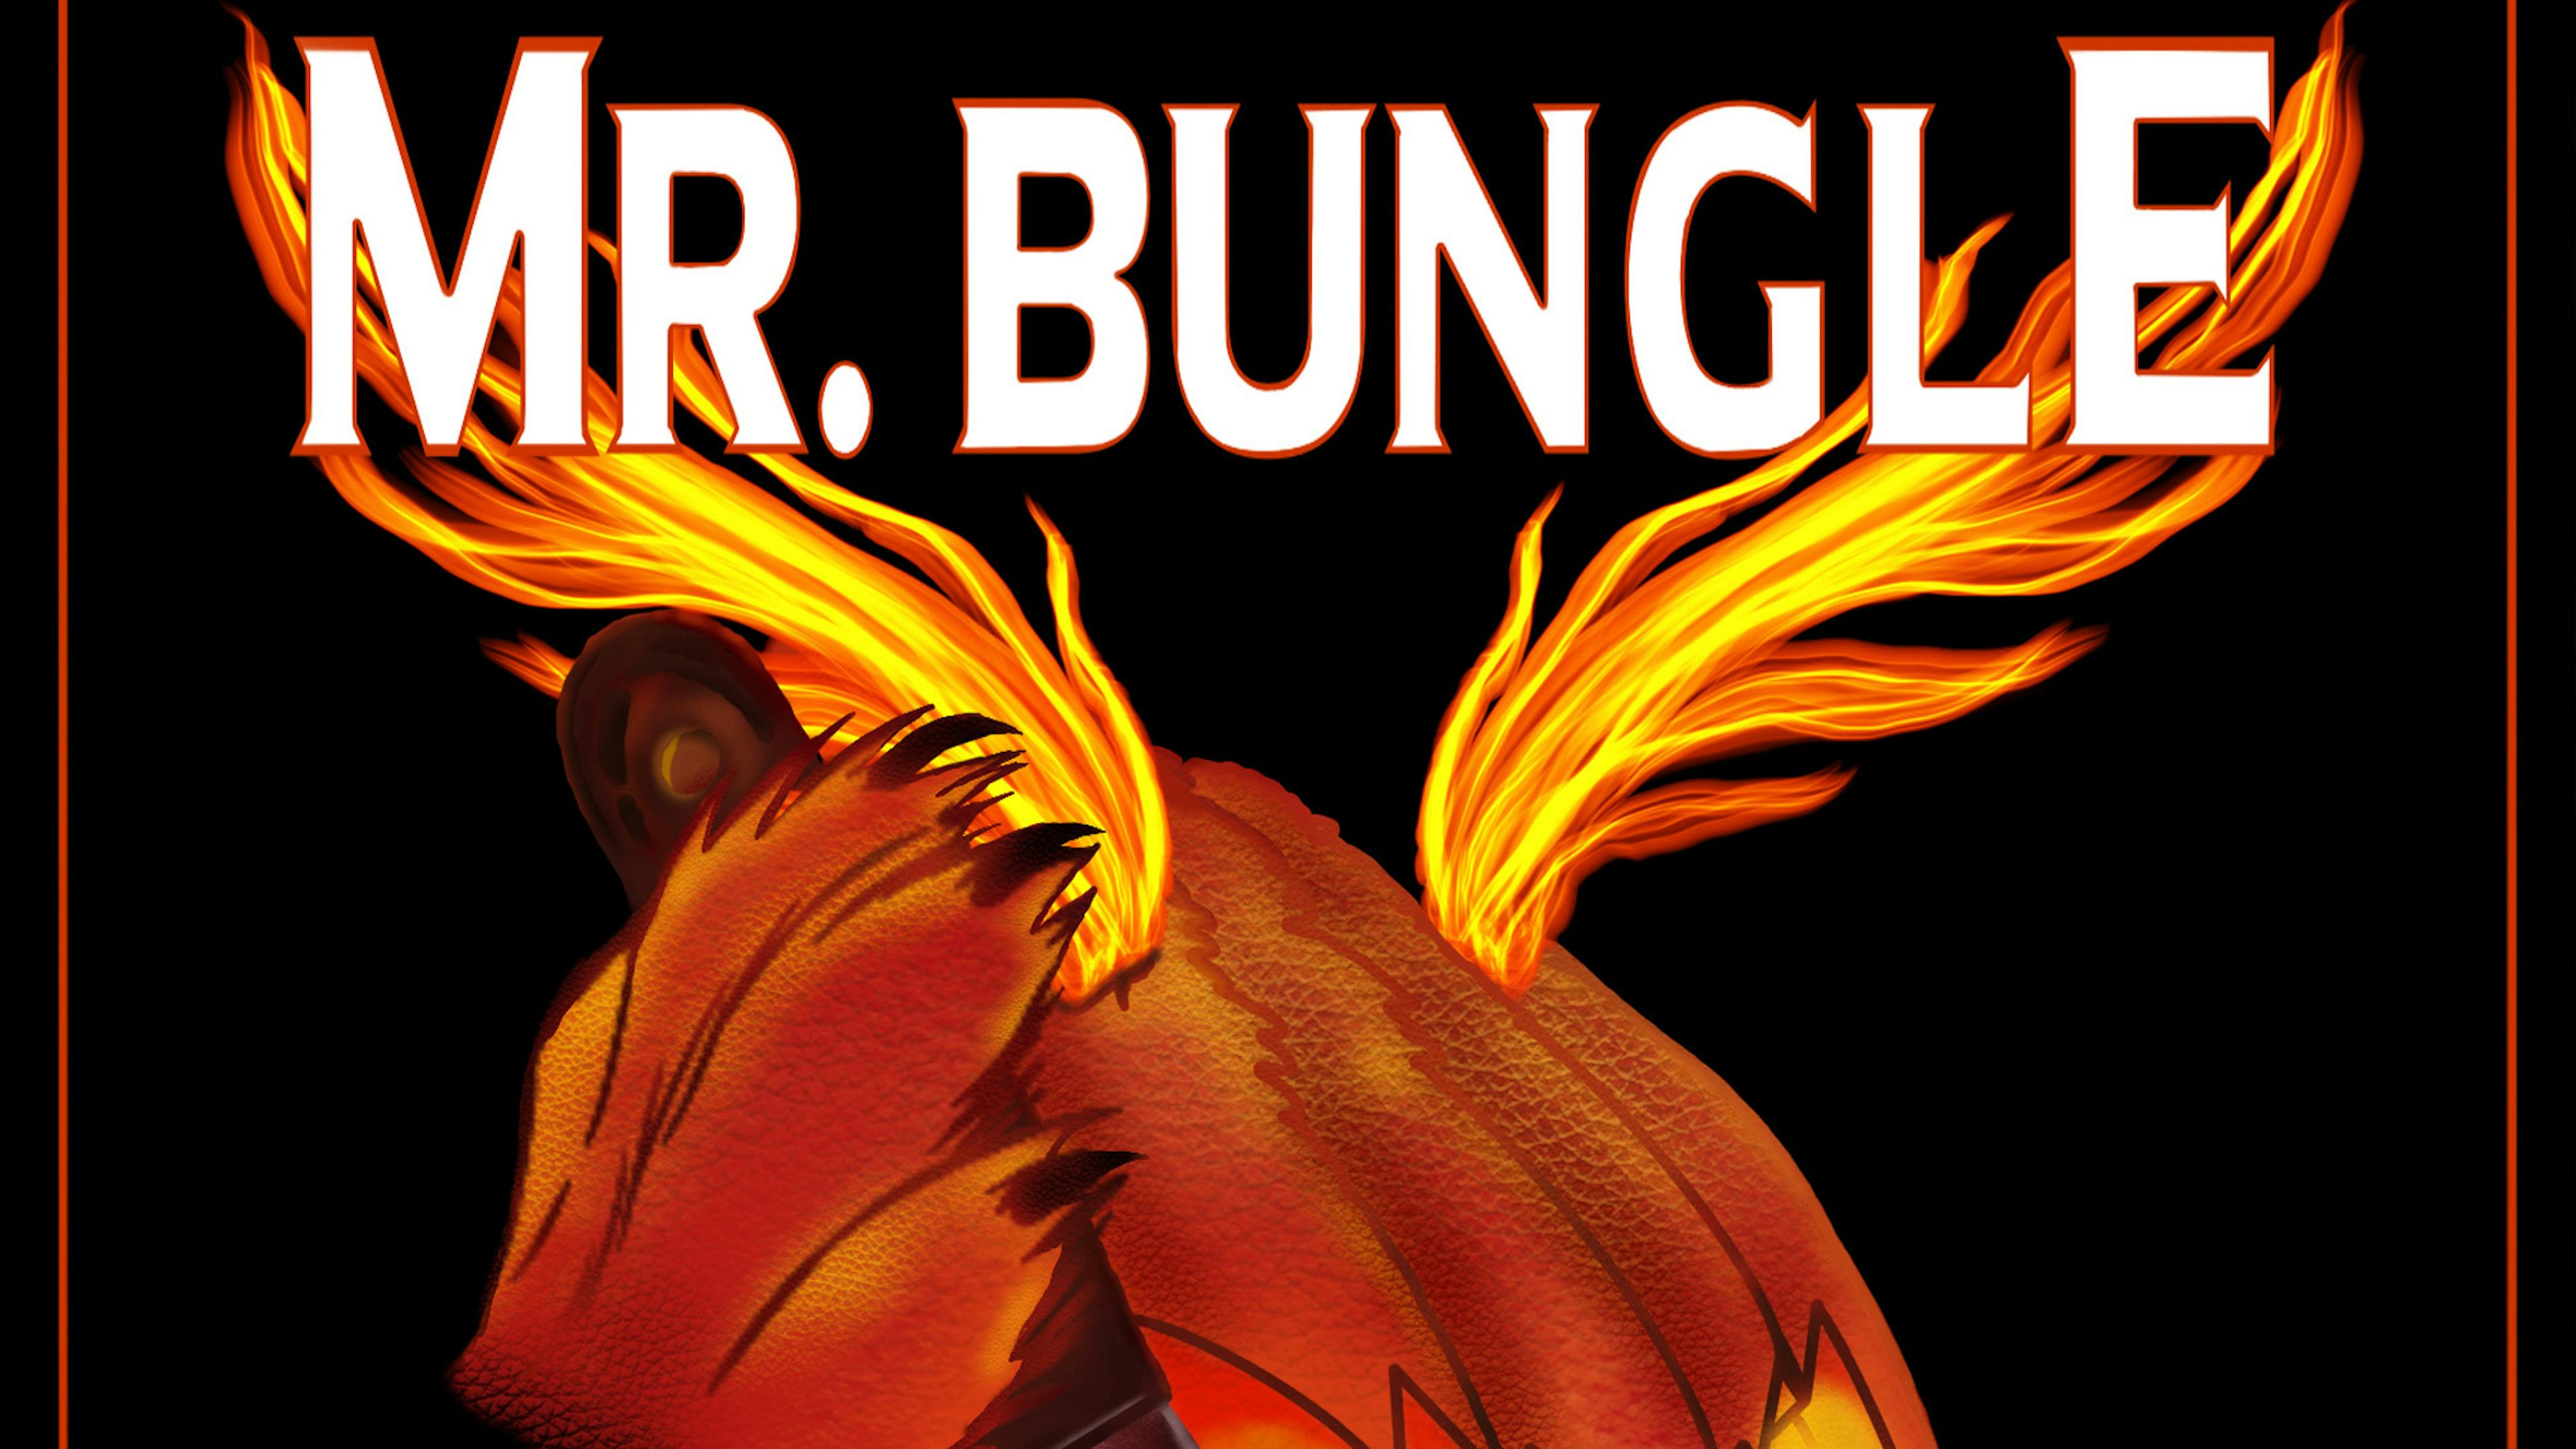 Mr. Bungle To Play Virtual Live Concert Experience On Halloween